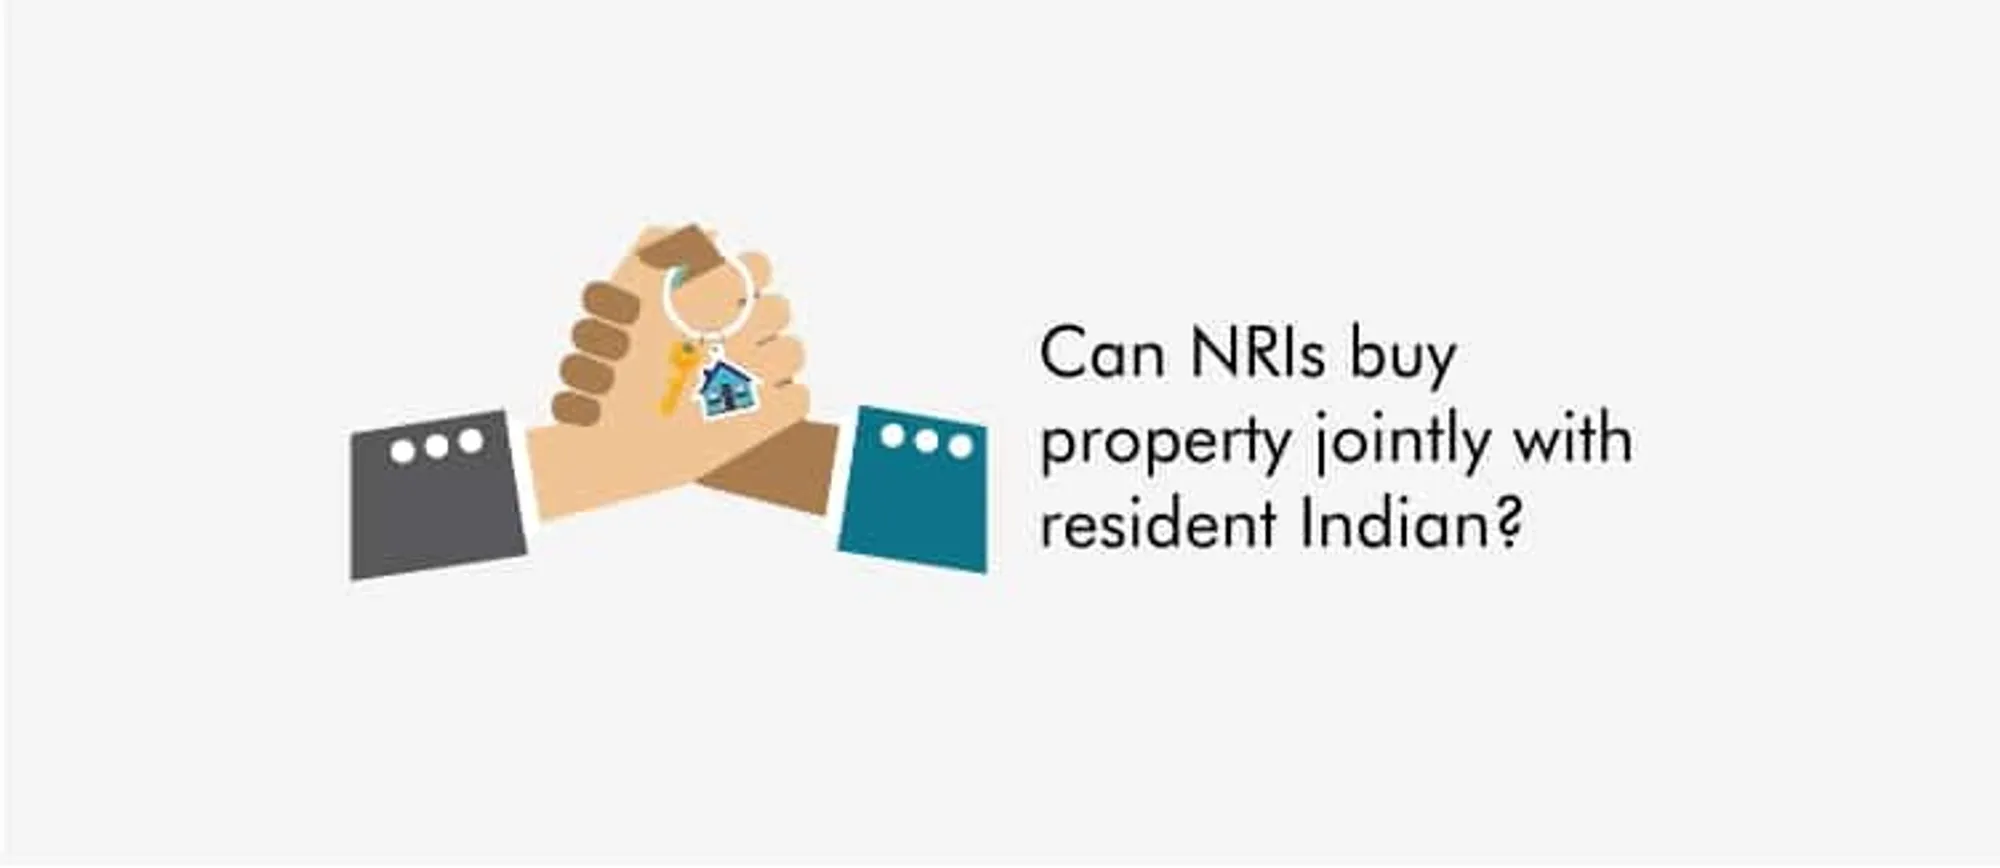 Can NRIs buy property jointly with resident Indian?